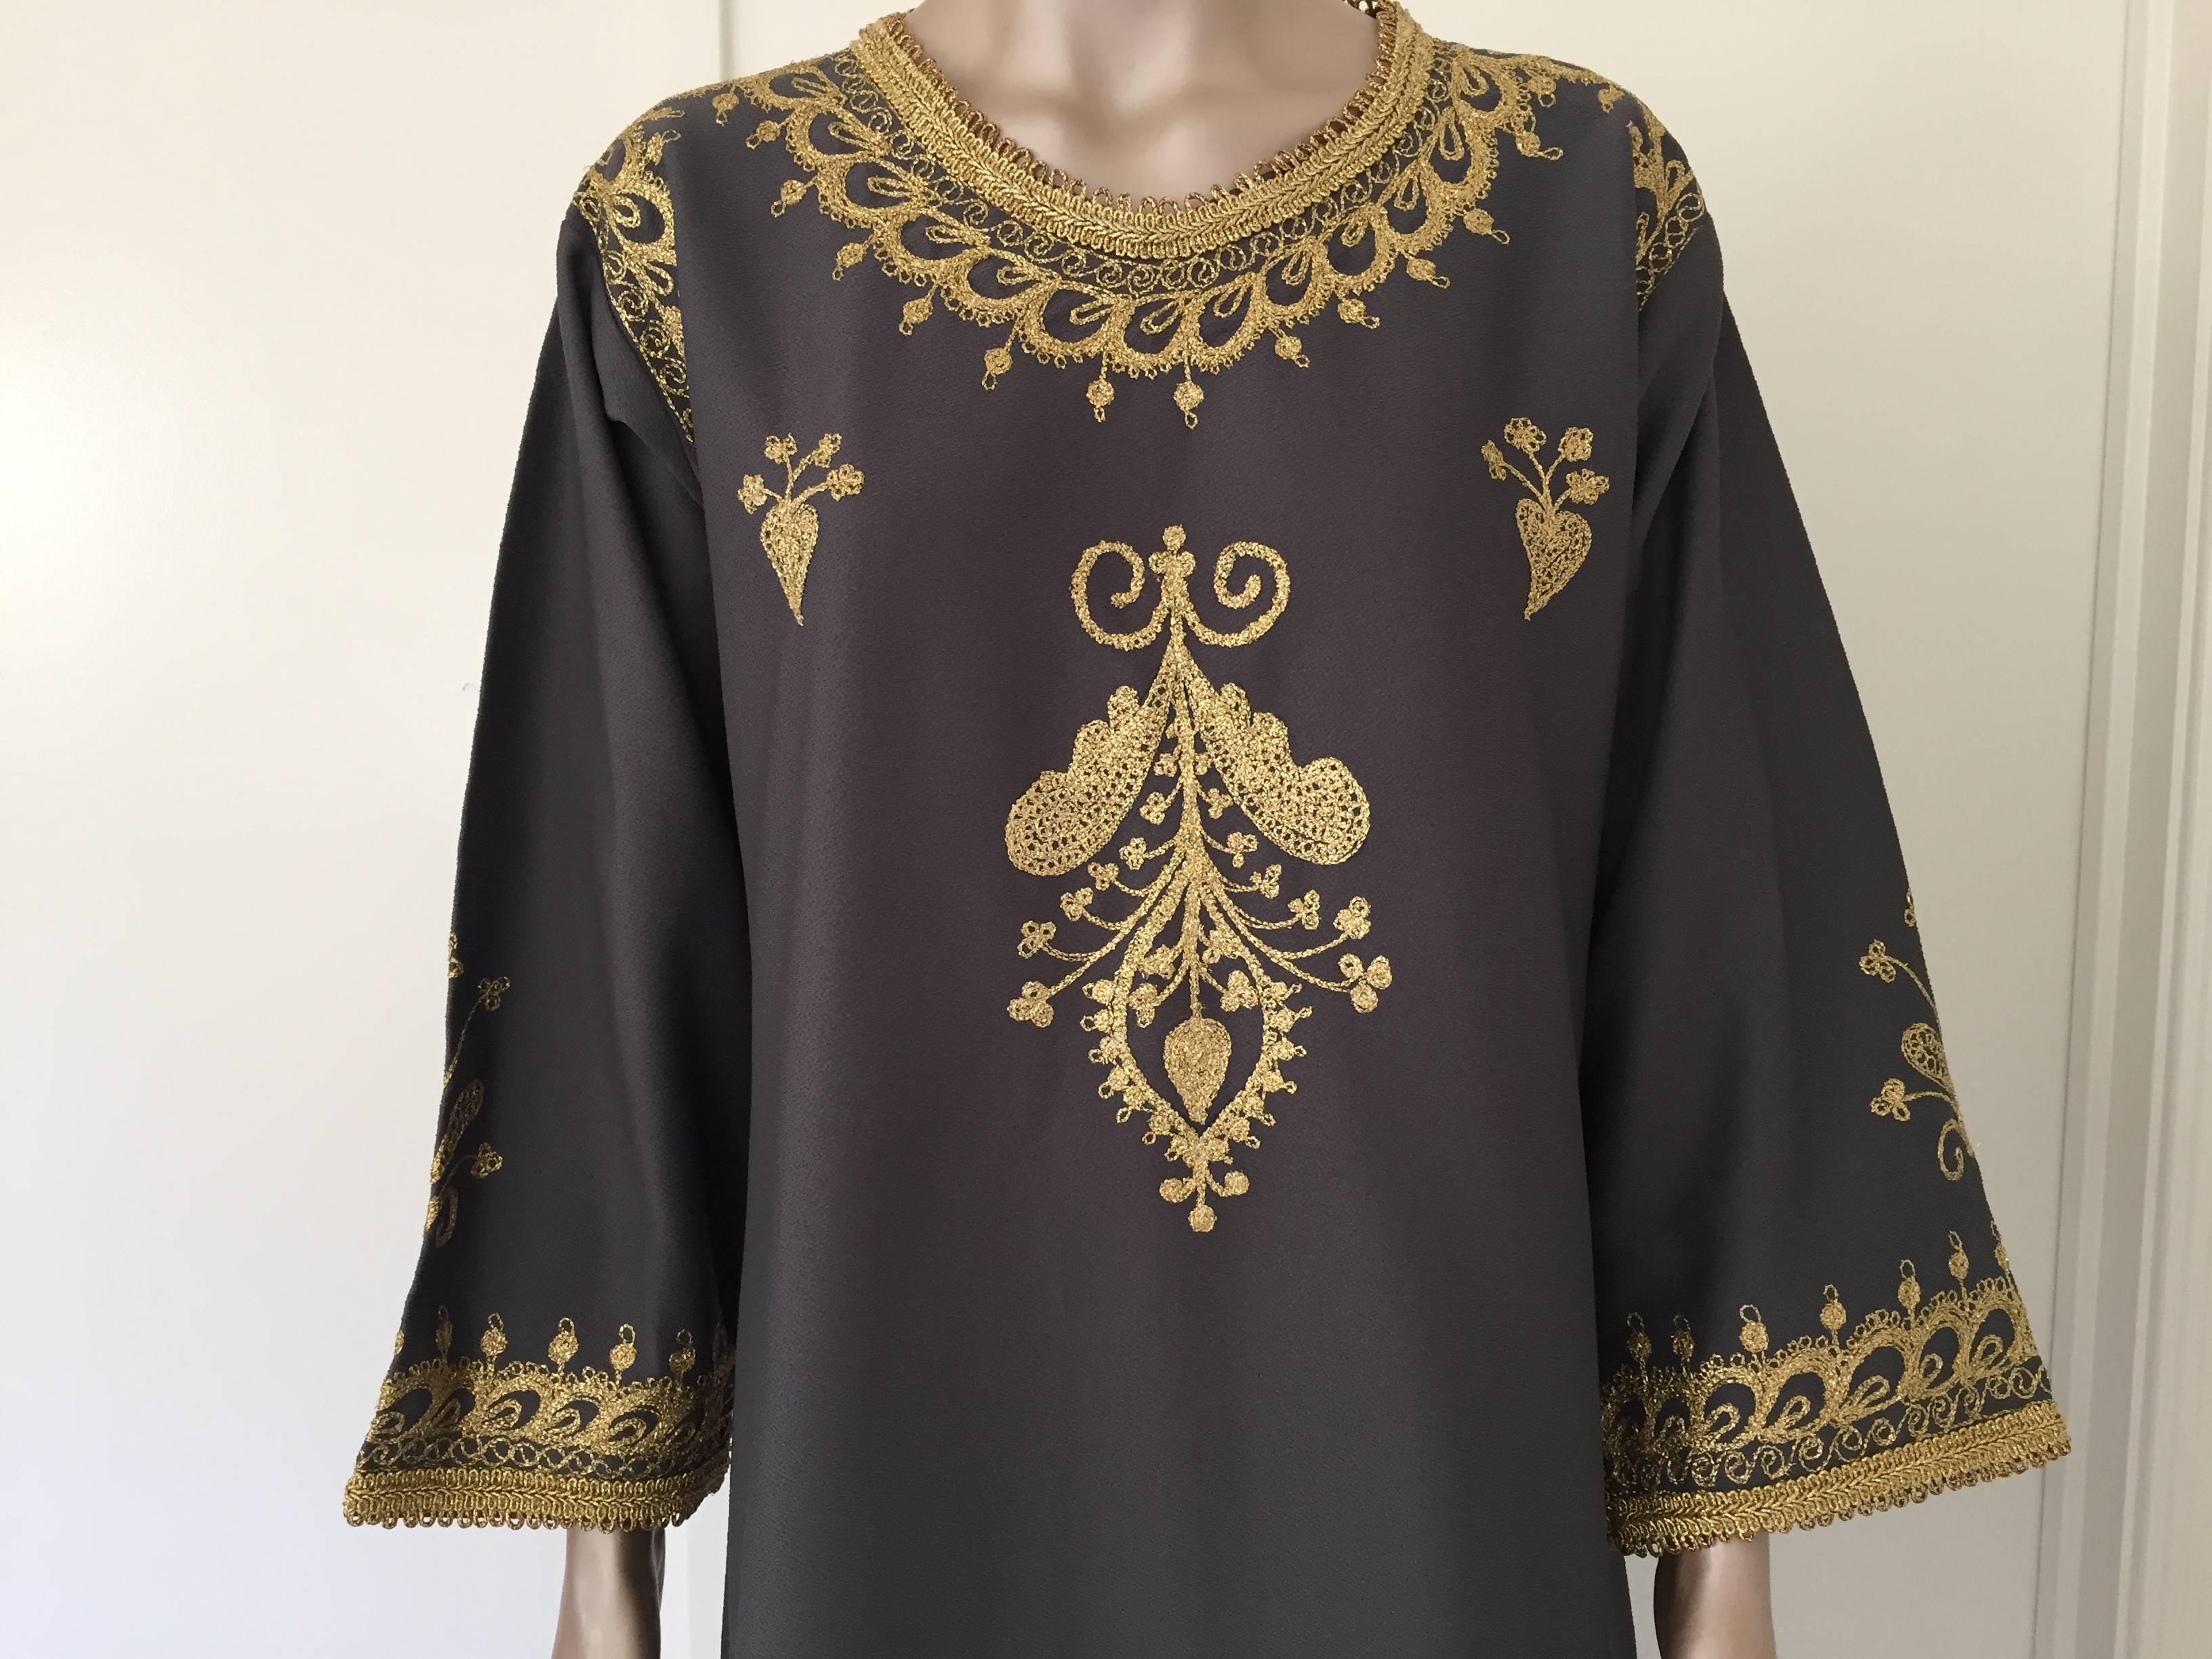 Elegant Moroccan caftan embroidered charcoal grey color with gold threads.
Circa 1970s.
This long maxi dress kaftan features a traditional Egyptian neckline, with side slits and embellished sleeves with gold Moorish designs.
In Morocco, fashion